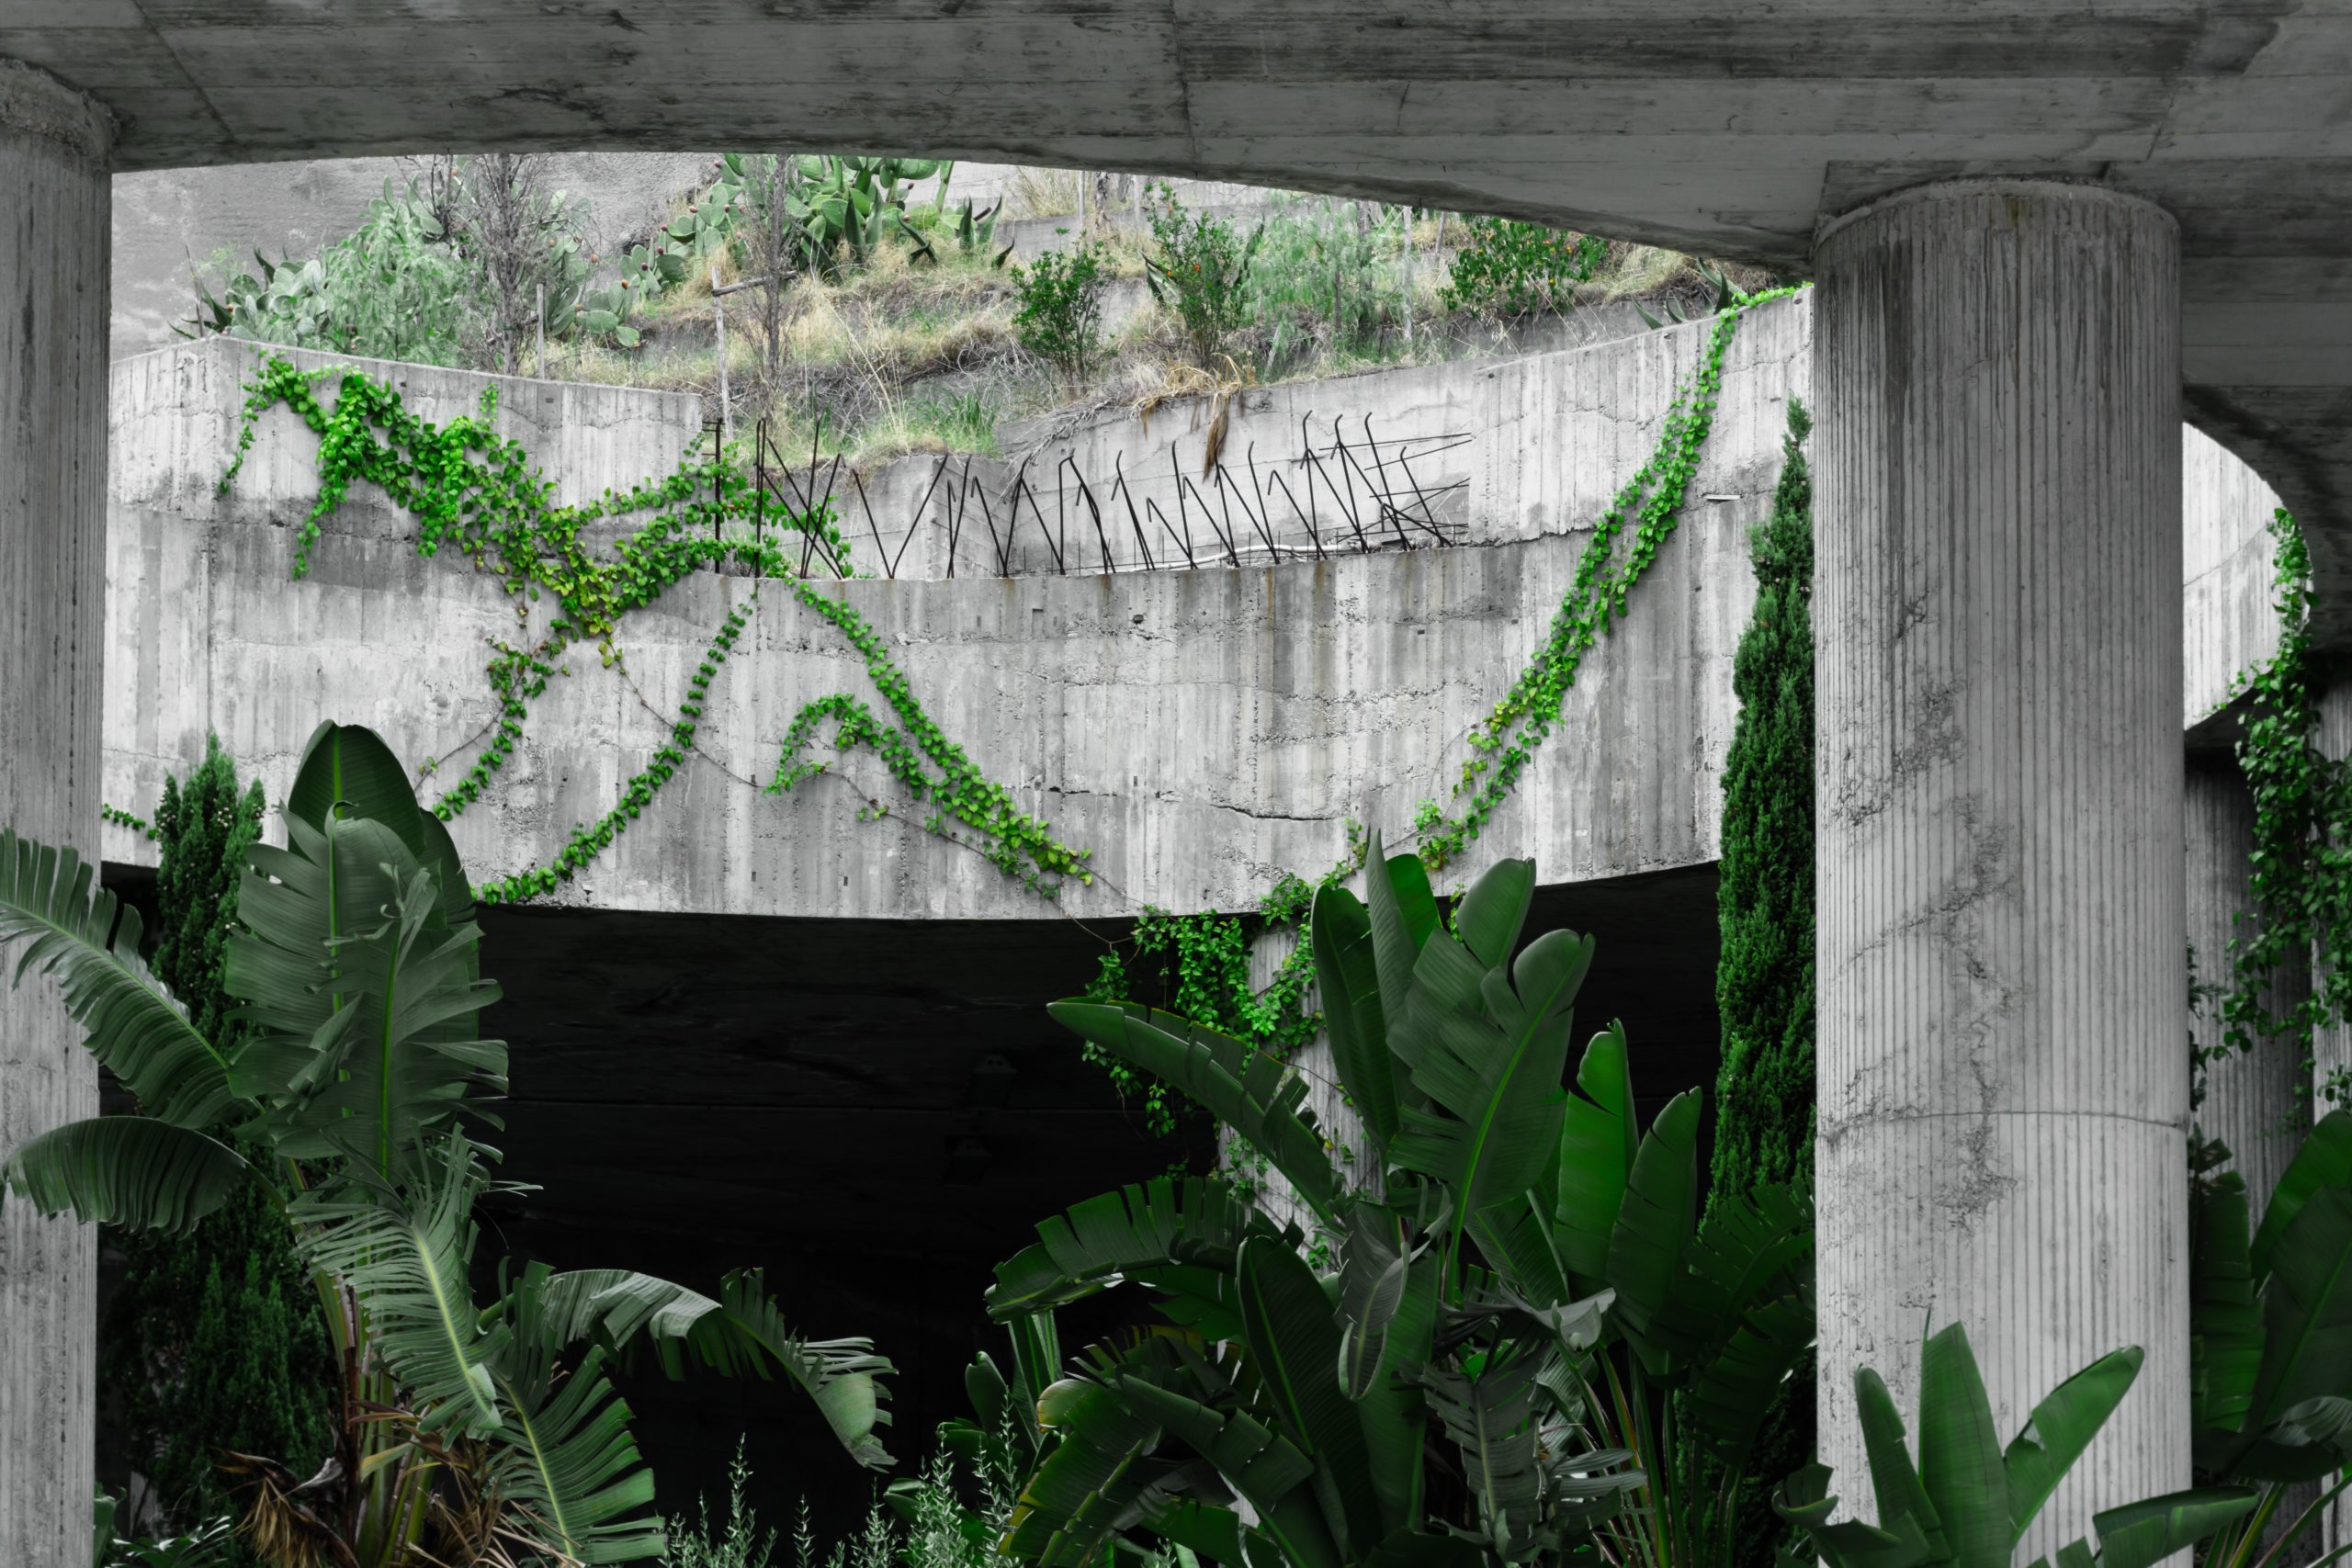 Numerous green plants reside within a concrete structure.